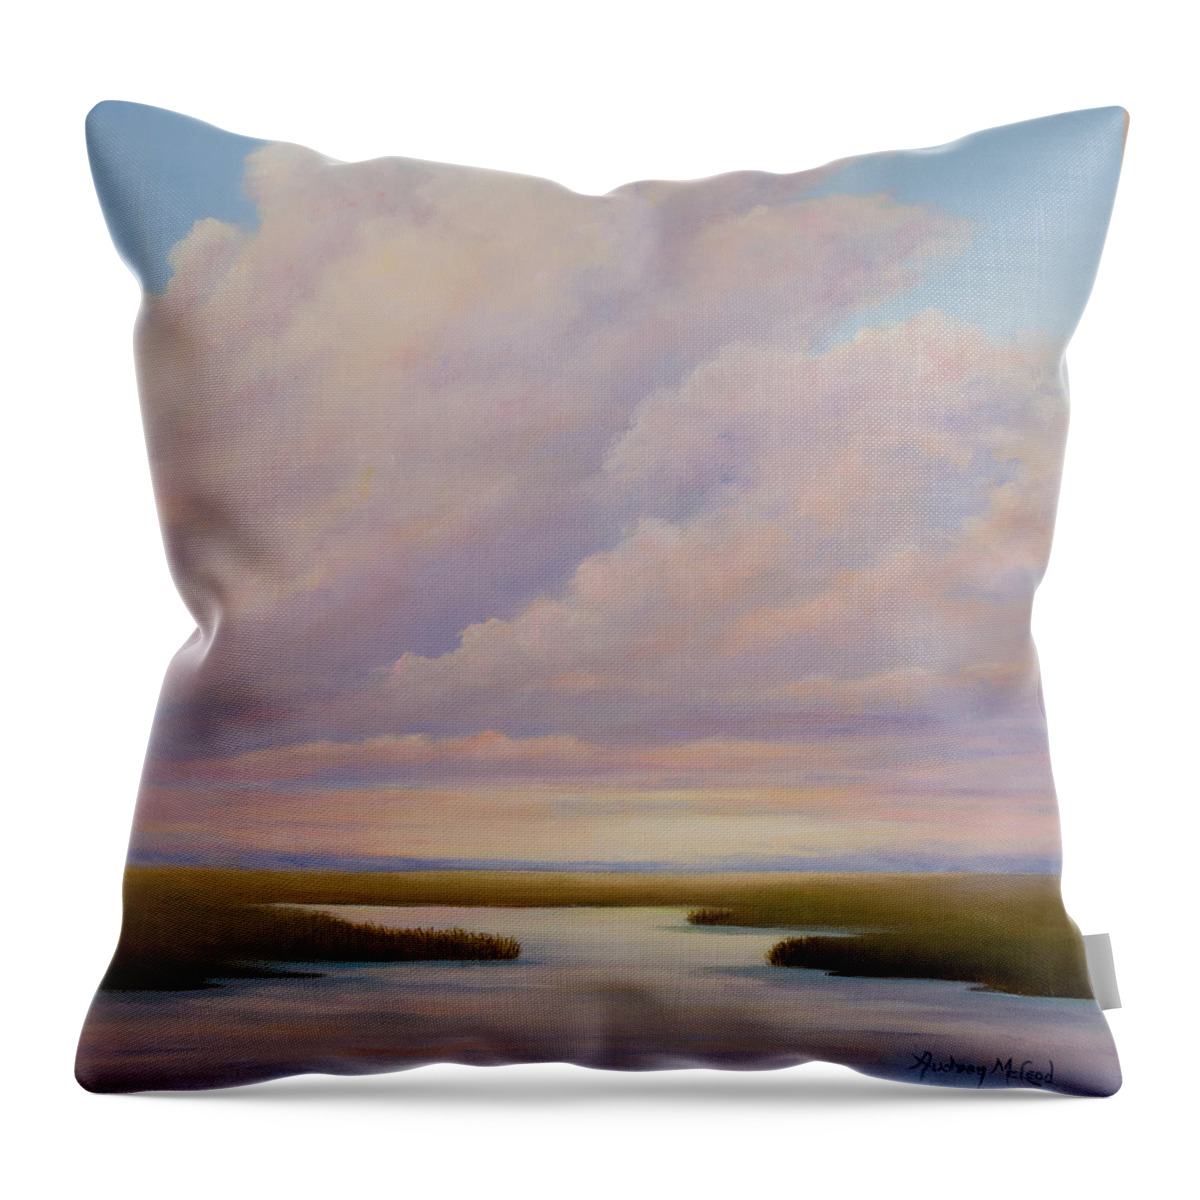 Beautiful Wind Driven Clouds Throw Pillow featuring the painting Serenity by Audrey McLeod